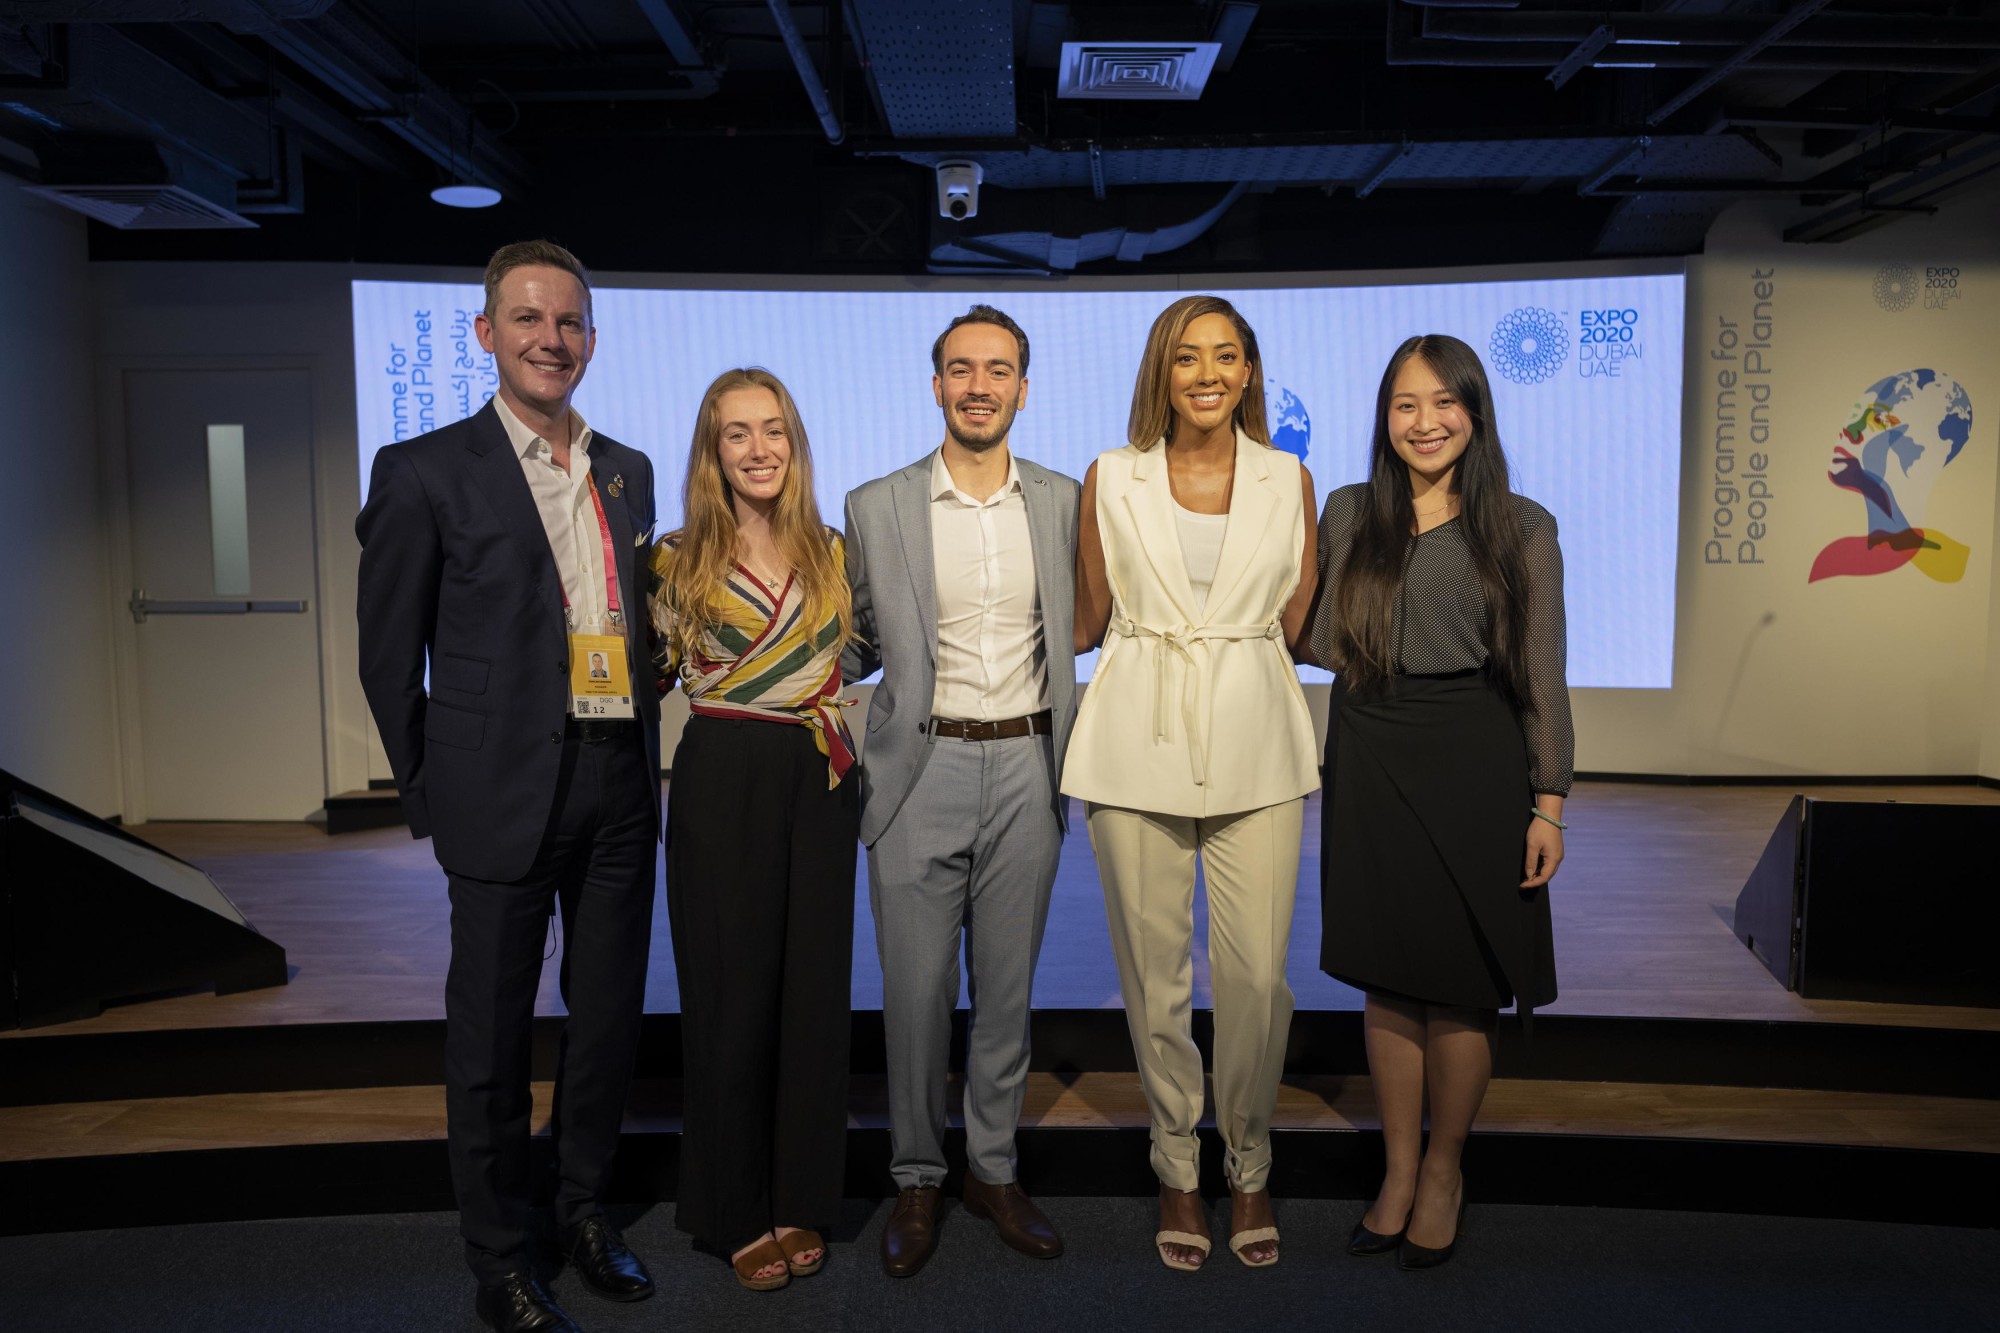 A group photo with Dr Joanna Abeyie MBE (R2), Founder of Blue Moon Consulting, spotlighting innovative solution speaks at the Closing the Digital Divide talk at Nexus for People and Planet m31035